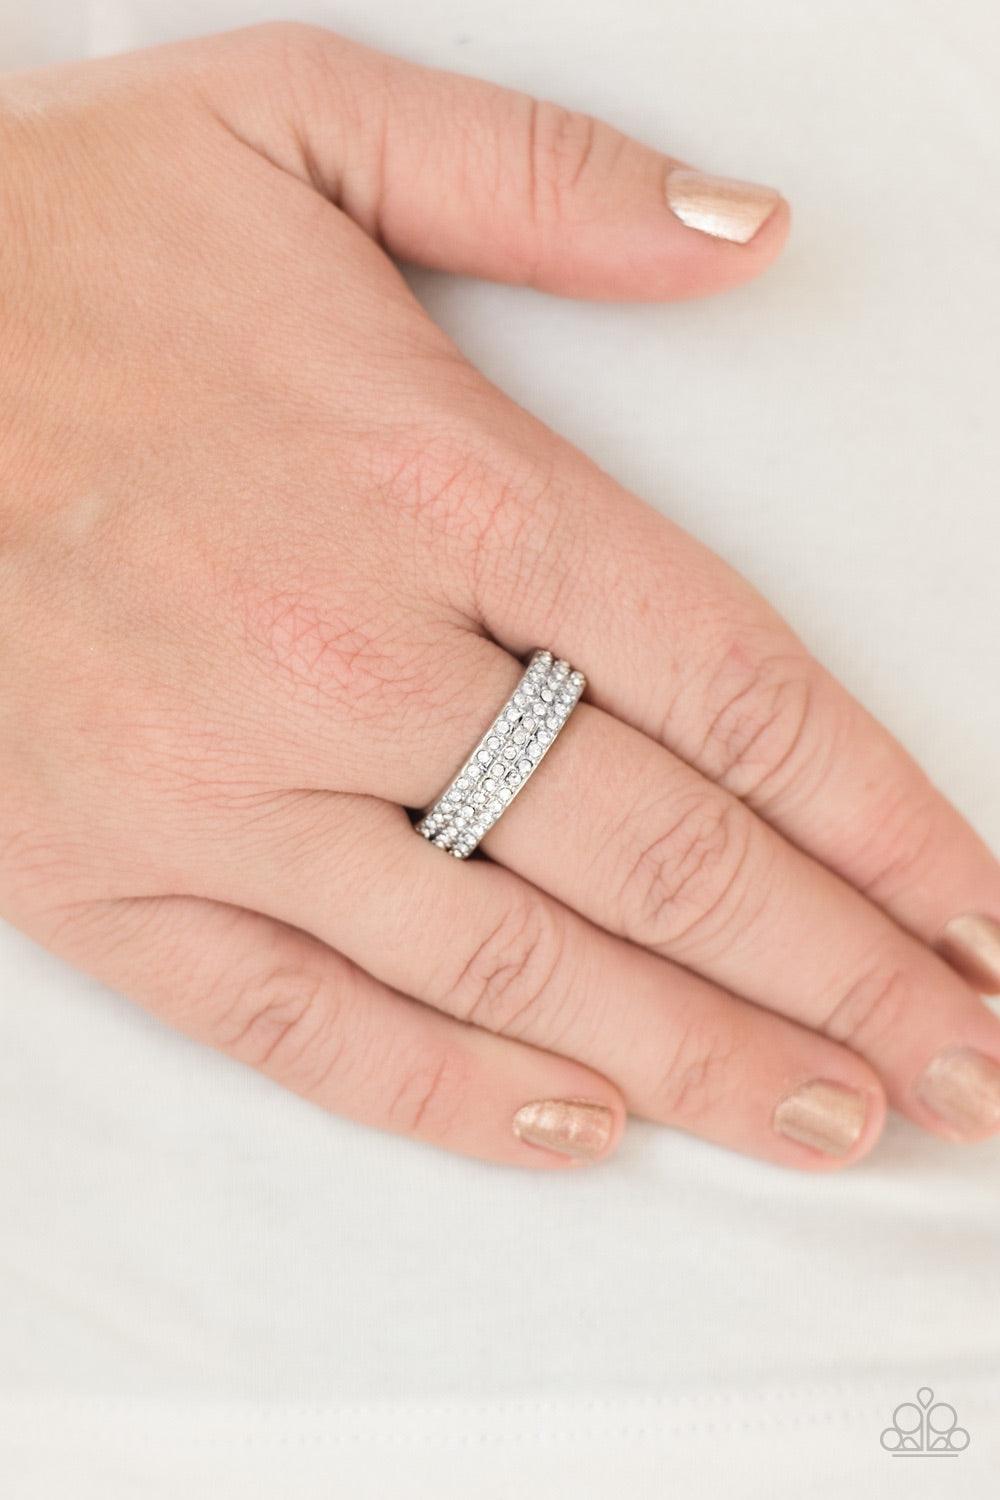 Paparazzi Accessories Turn The Other CHIC - White Featuring a slightly raised center, three shimmery silver bars coalesce into a dainty band. Rows of glassy white rhinestones are encrusted along the band, adding a refined finish to the classic palette. Fe